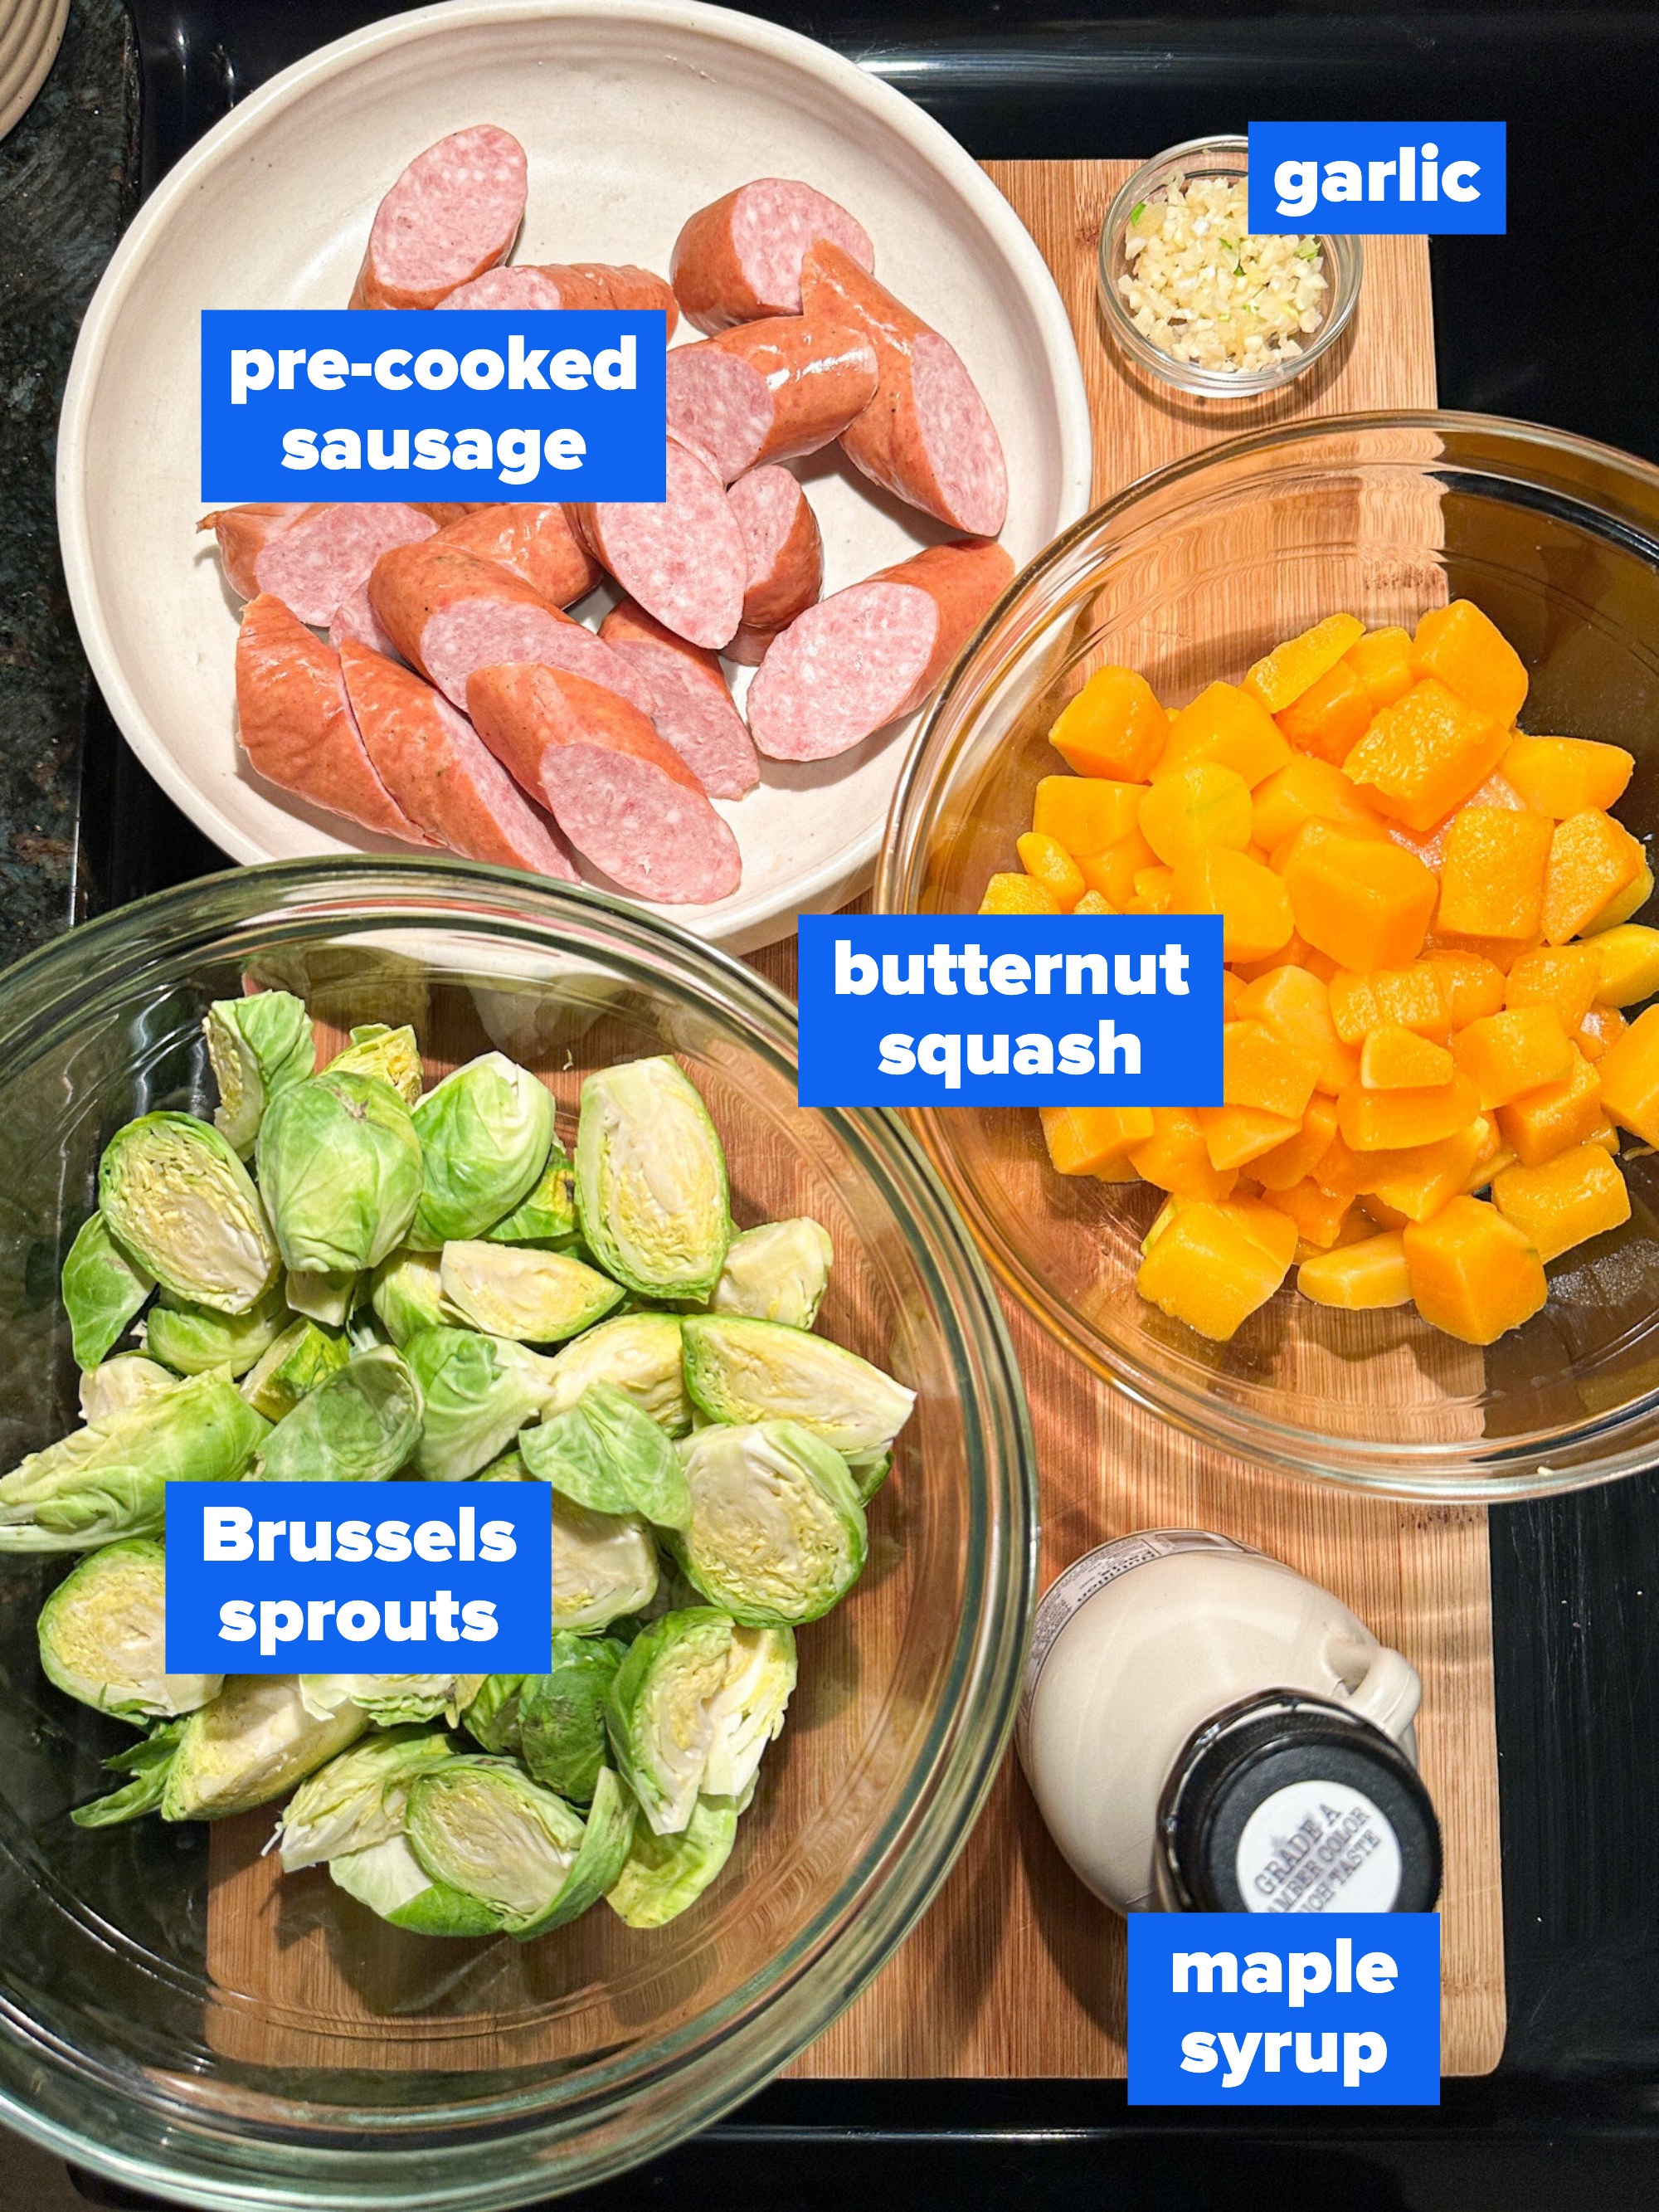 the ingredients: pre cooked sausage, garlic, butternut squash, Brussels sprouts, maple syrup